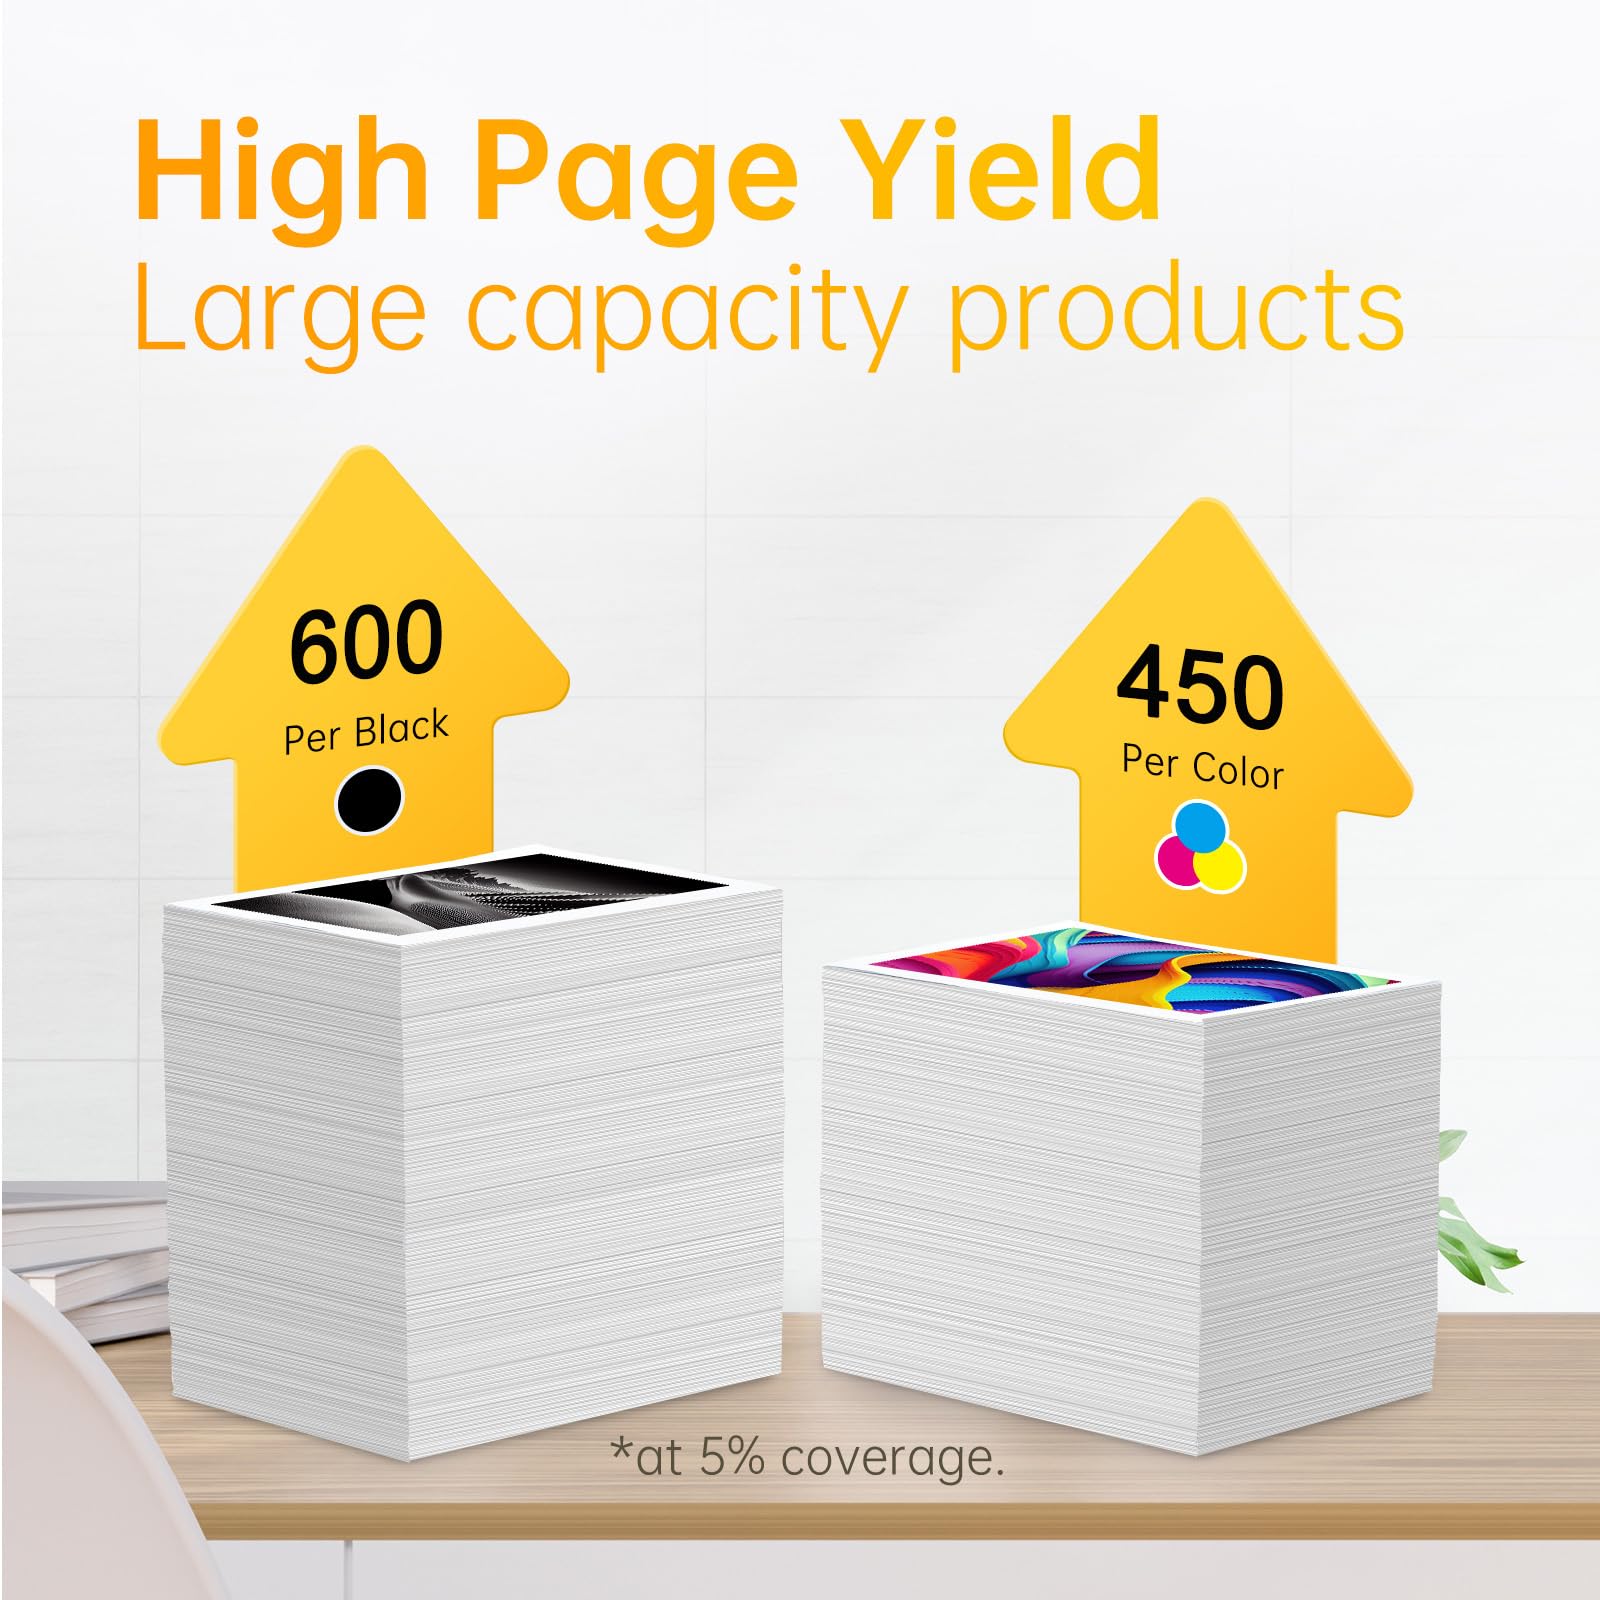 High Page Yield Display for HP 62XL Ink Cartridges:high page yield of HP 62XL ink cartridges, with 600 pages per black cartridge and 450 pages per color cartridge, ideal for high-volume printing.